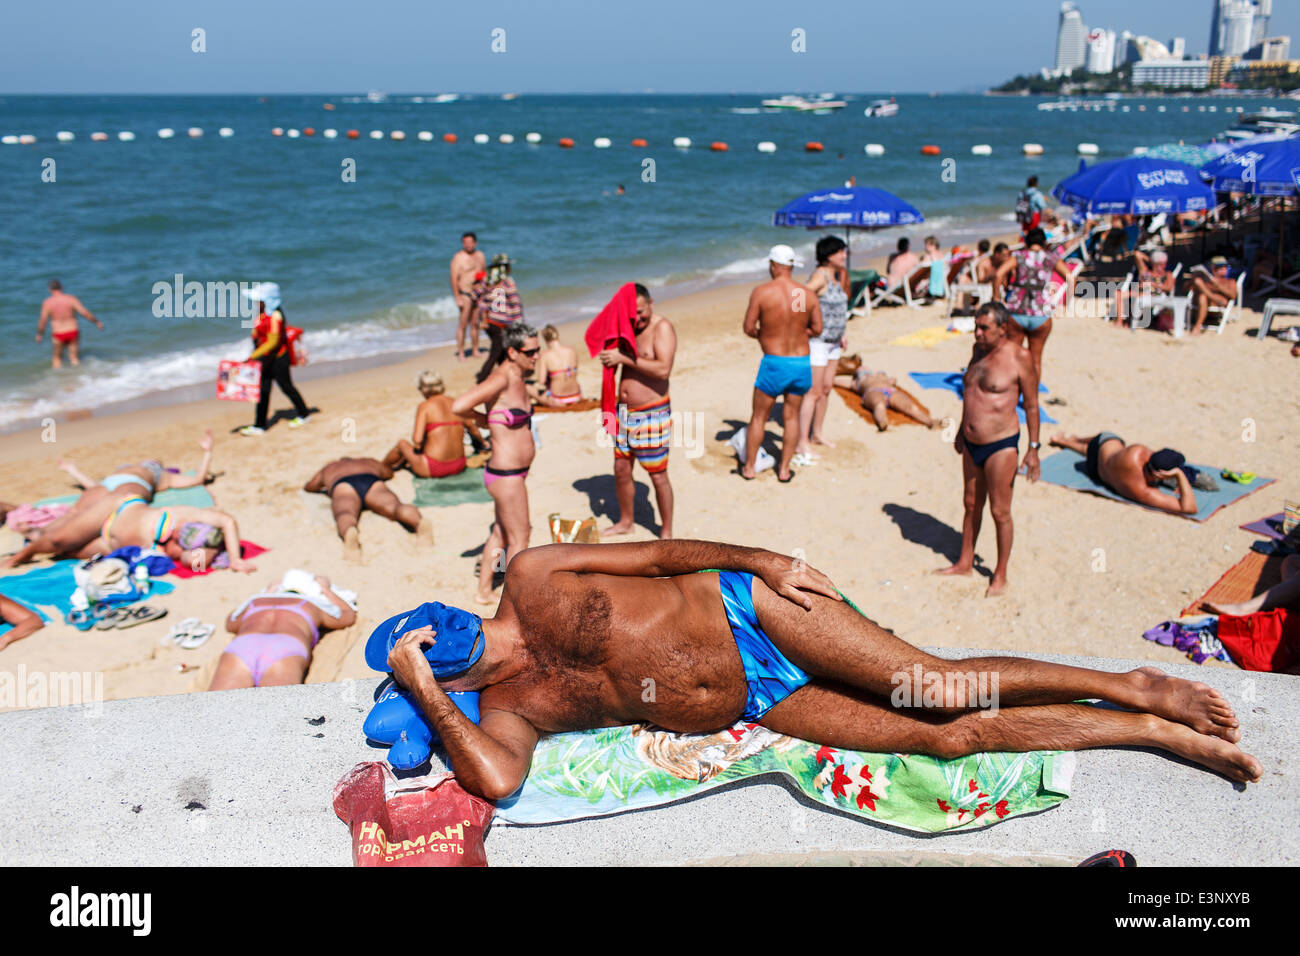 Foreign tourists sunbathing and relaxing on the beach in Pattaya, Thailand. Stock Photo